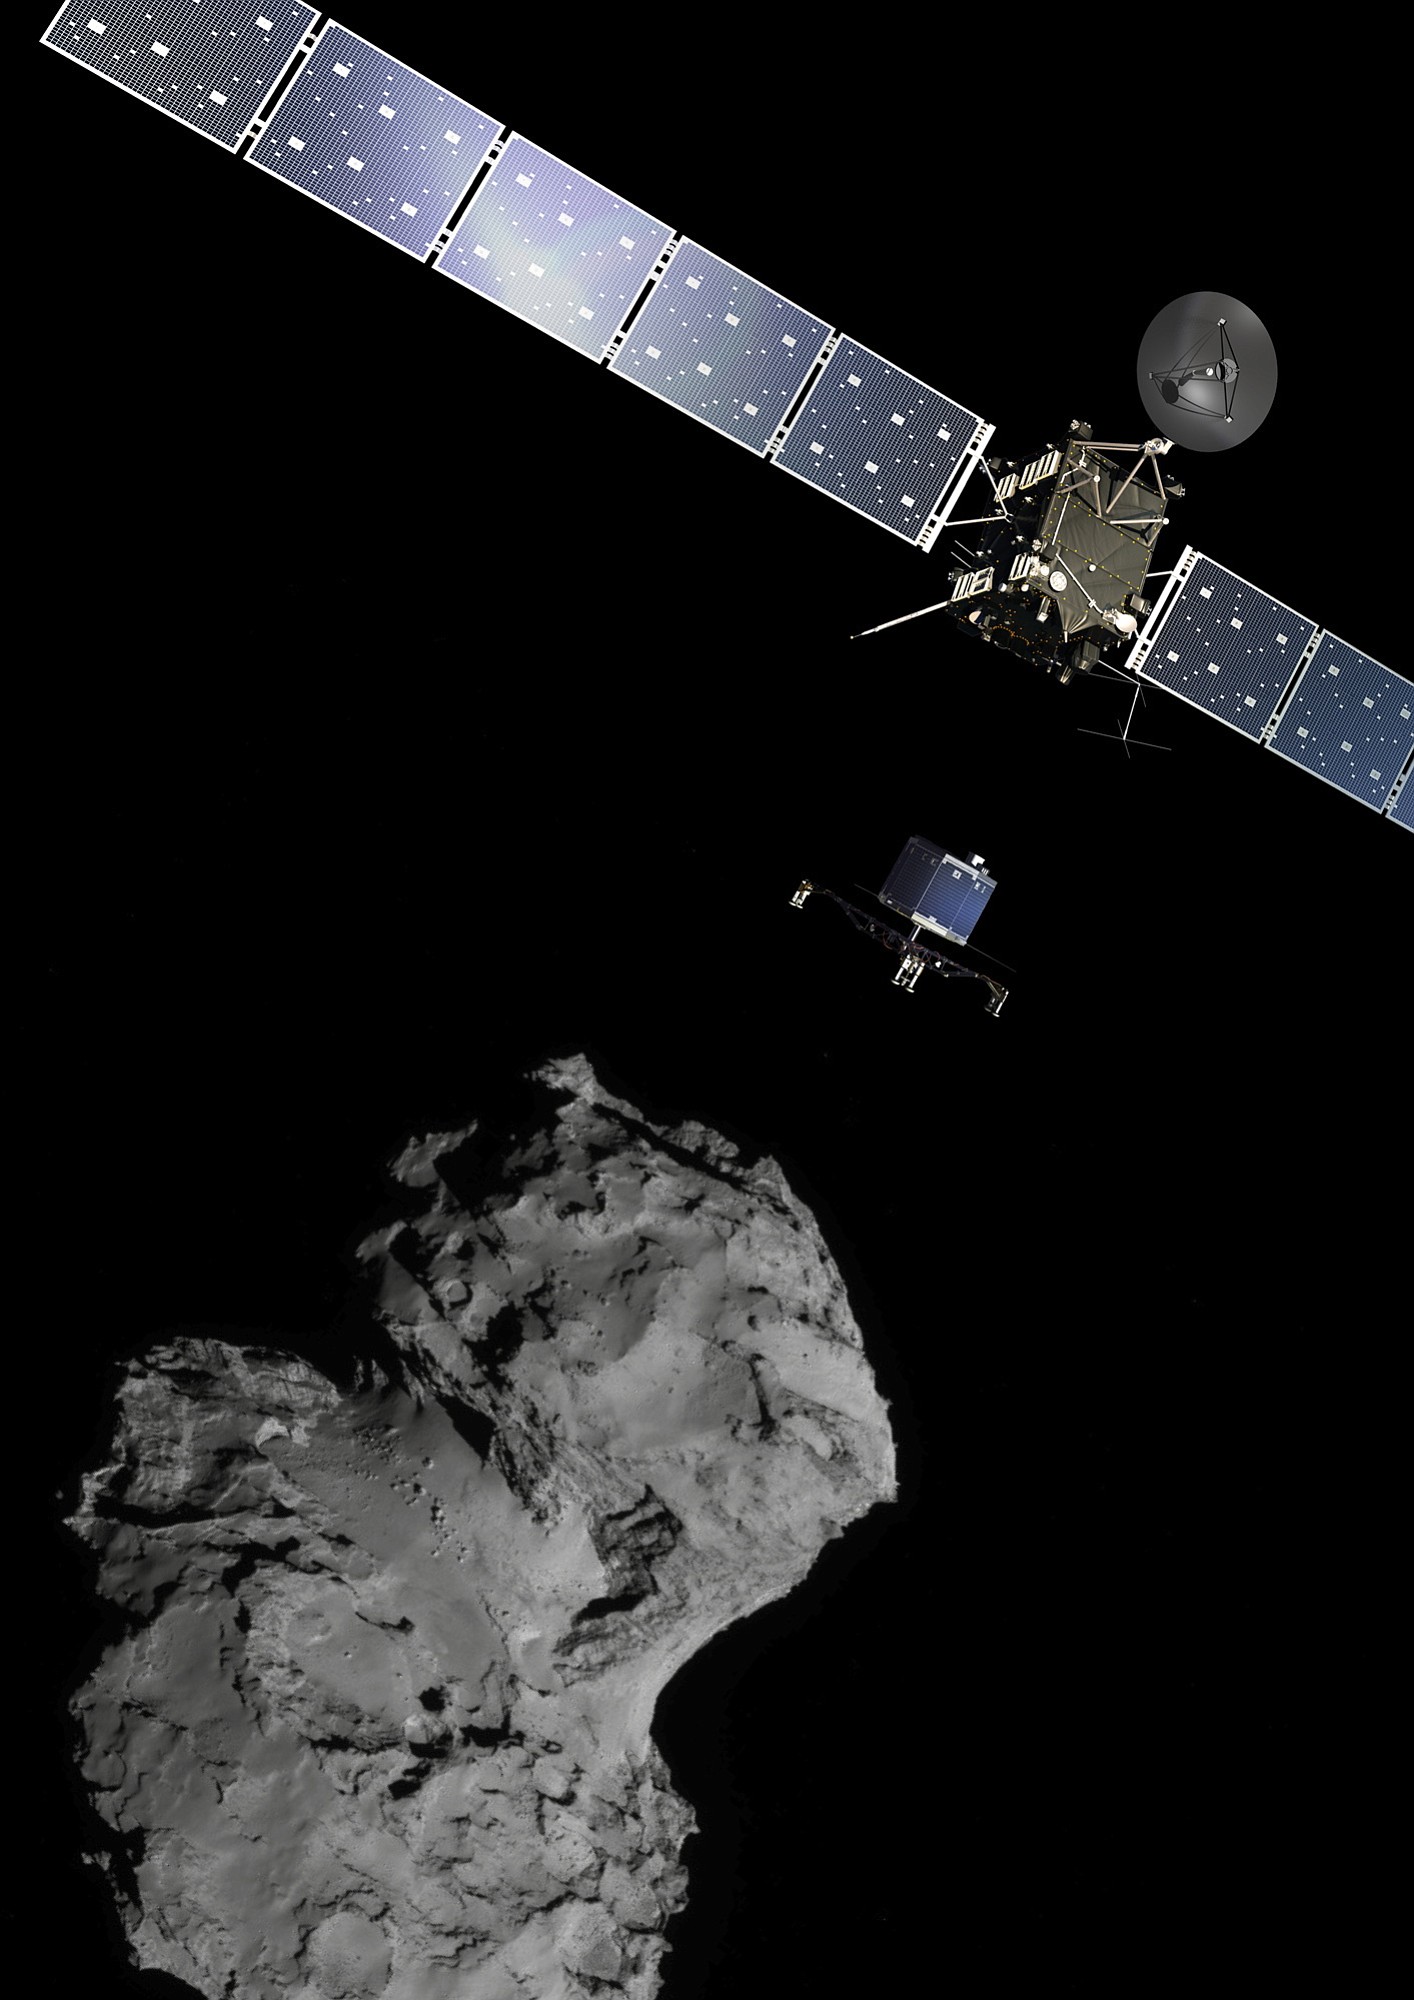 European Space Agency
The Rosetta mission poster is a combination of various images to illustrate the deployment of the Philae lander to comet 67P/Churyumov?Gerasimenko from the Rosetta spacecraft.